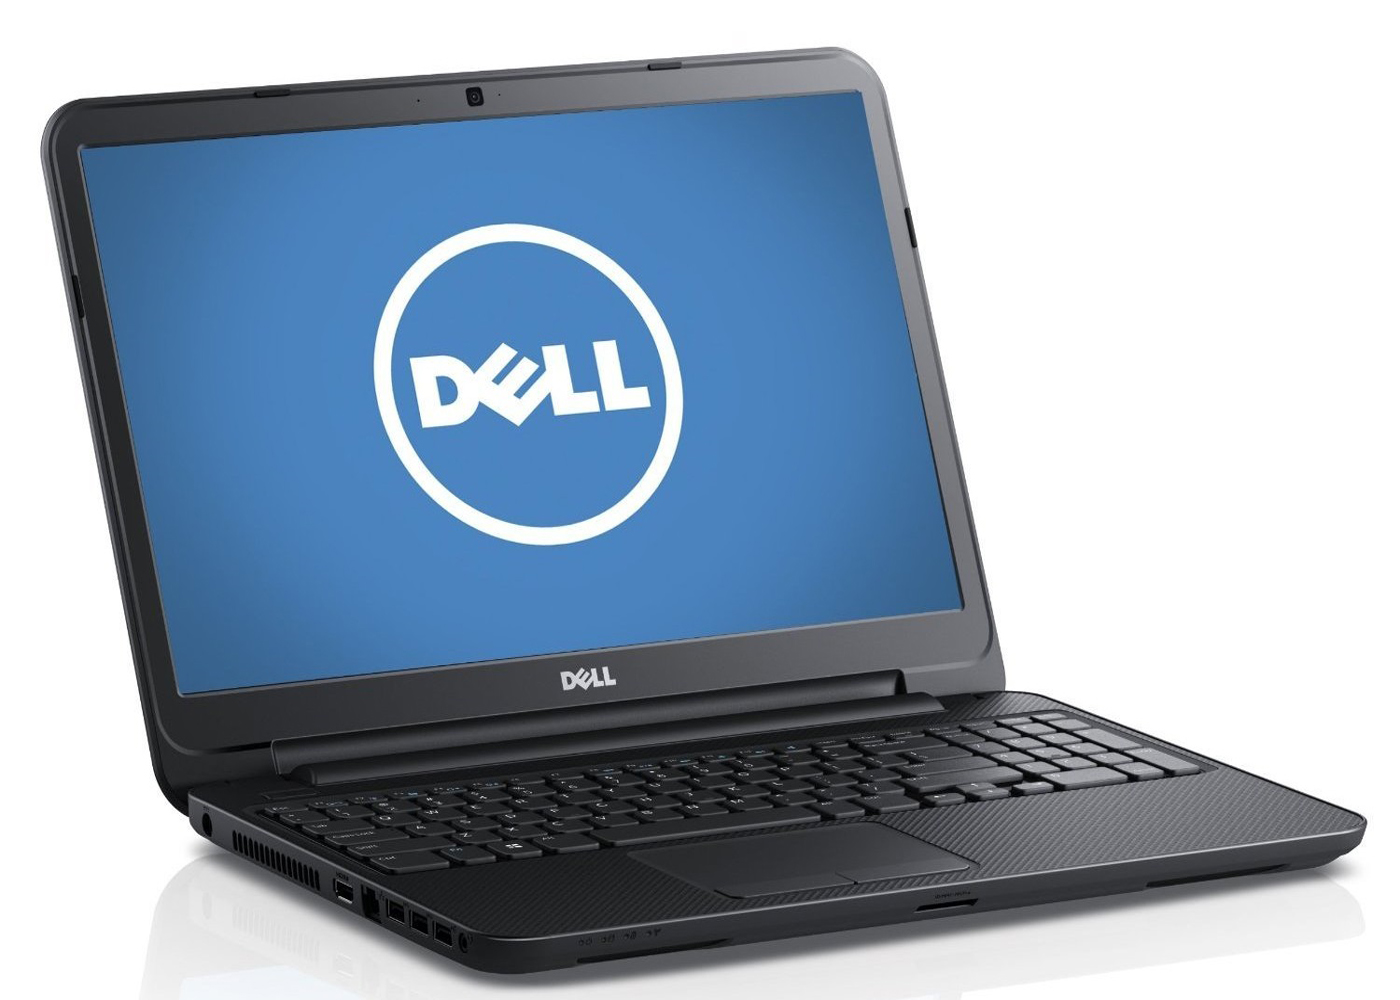 About The Dell Inspiron 15 3521 156 Inch Laptop Black Features And